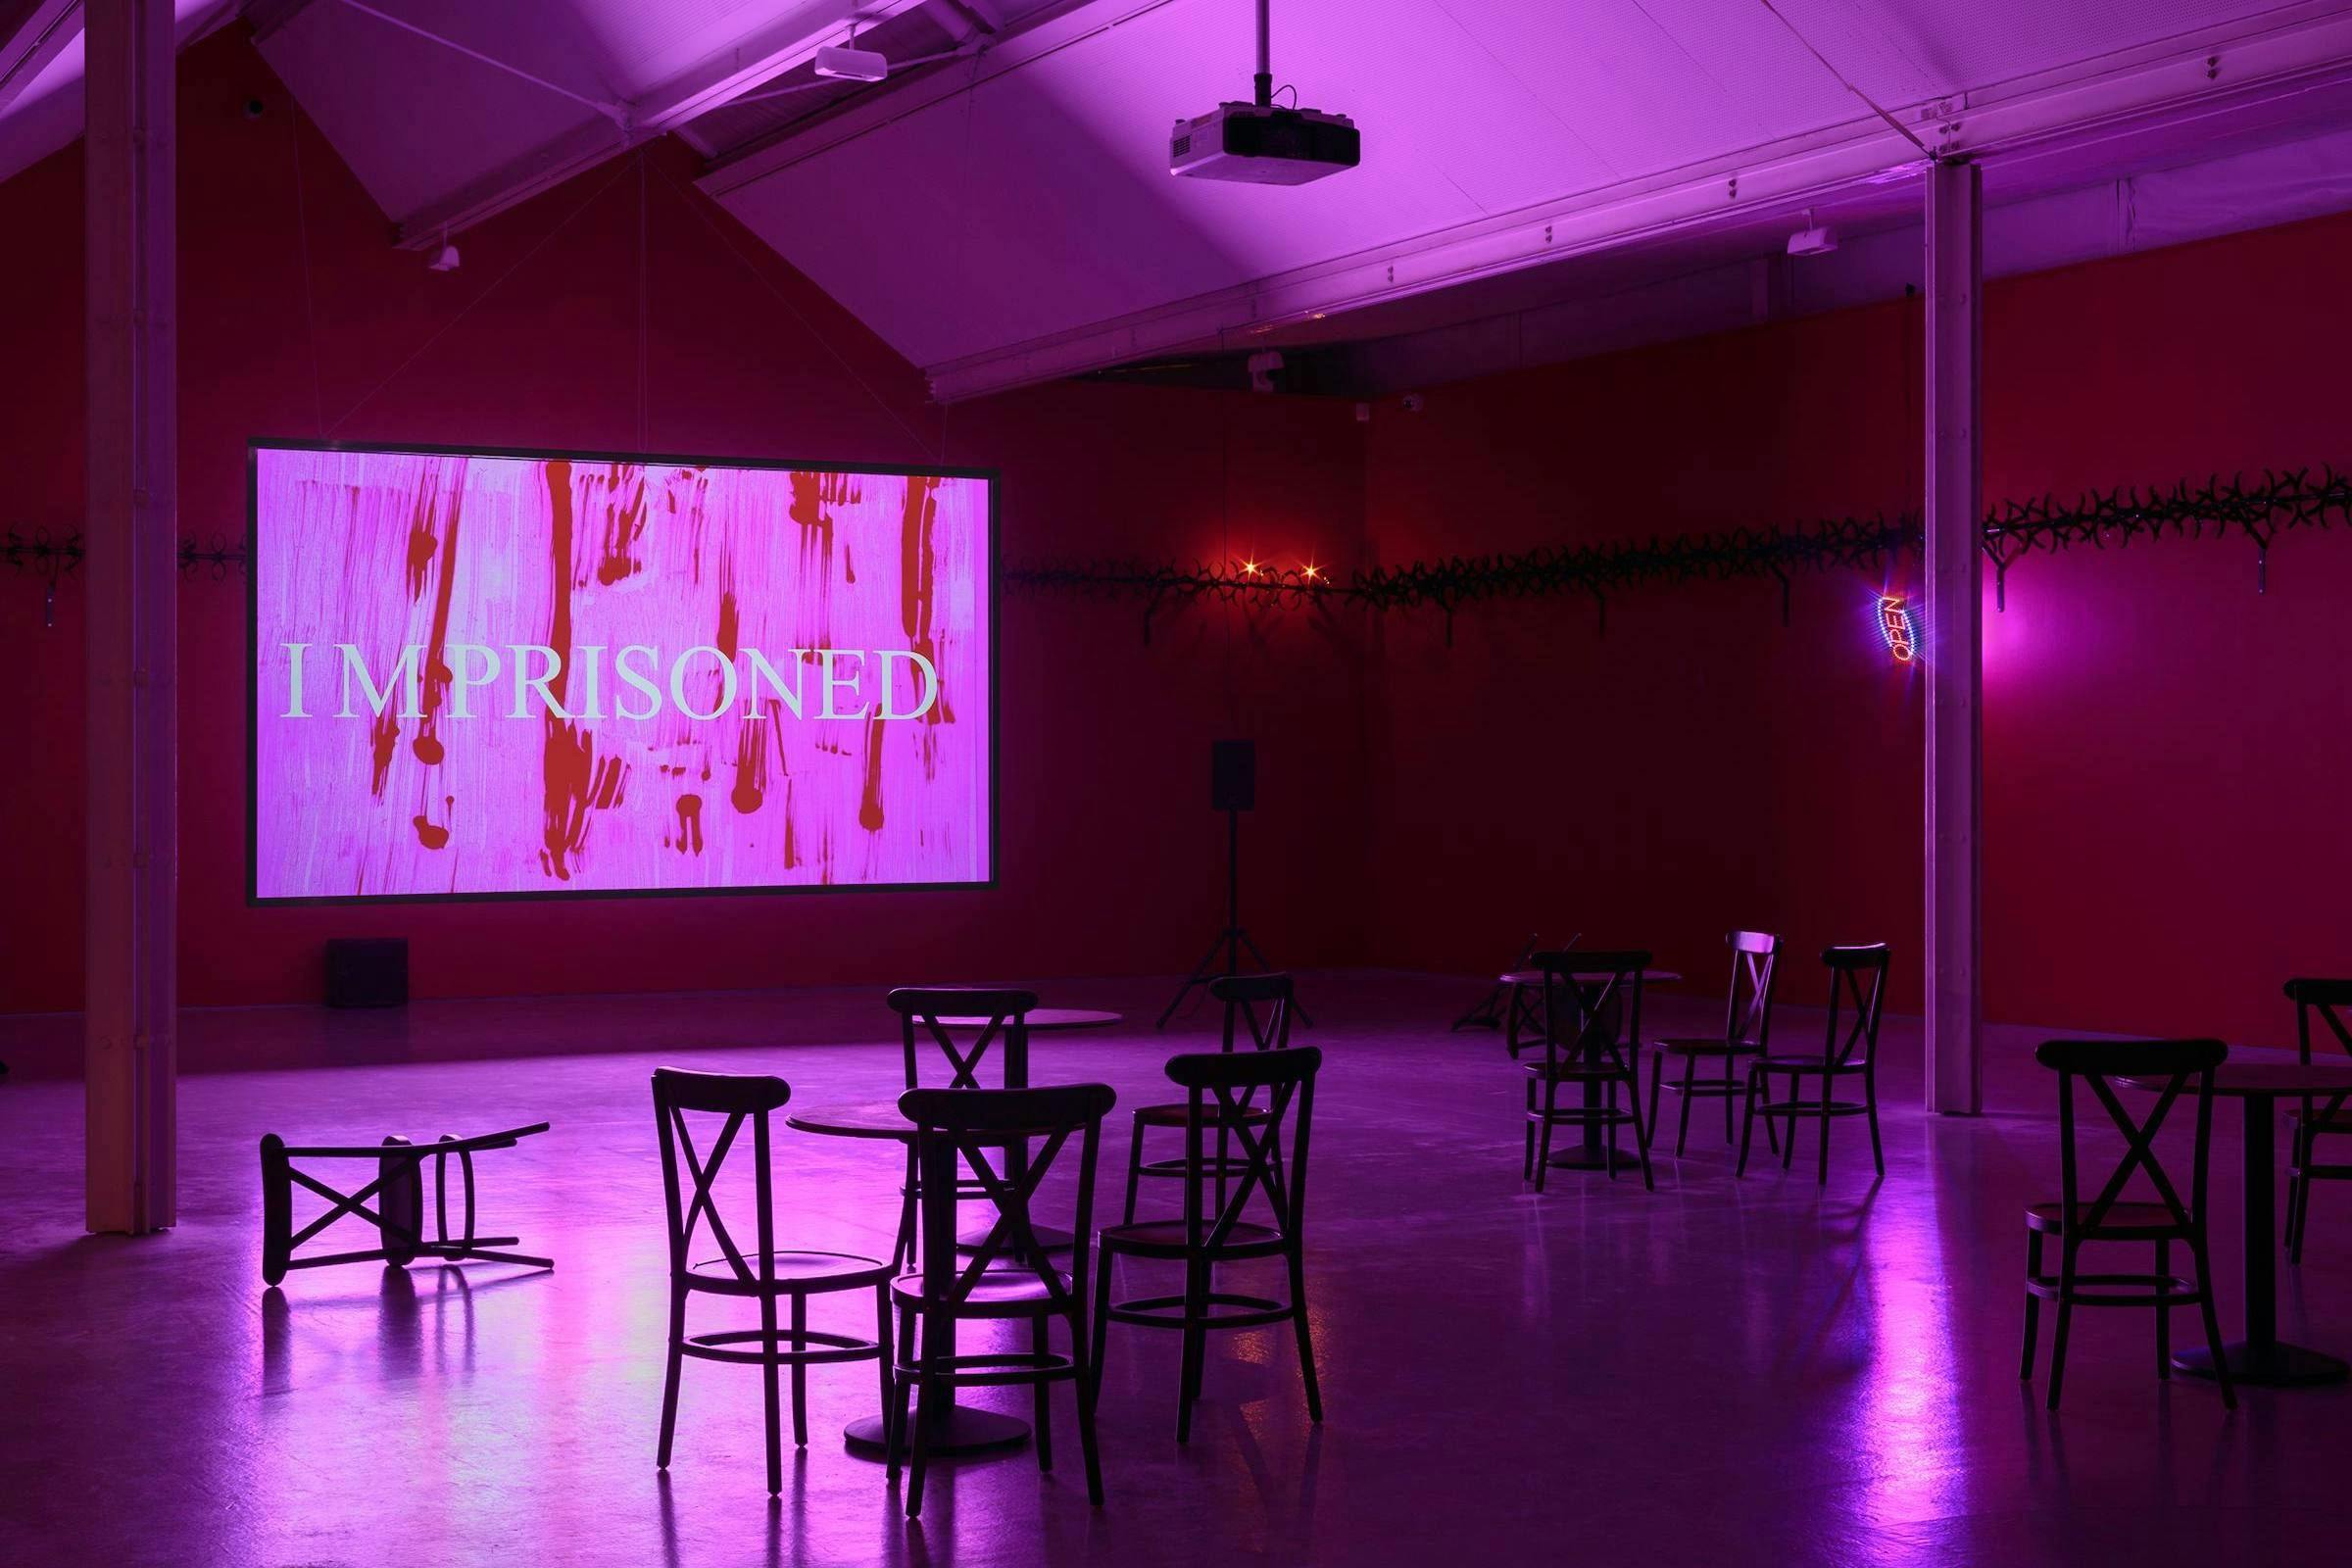 A video art work installed in a gallery space. There are a number of chairs and tables in front of the projection. The room is tinted with pink light.